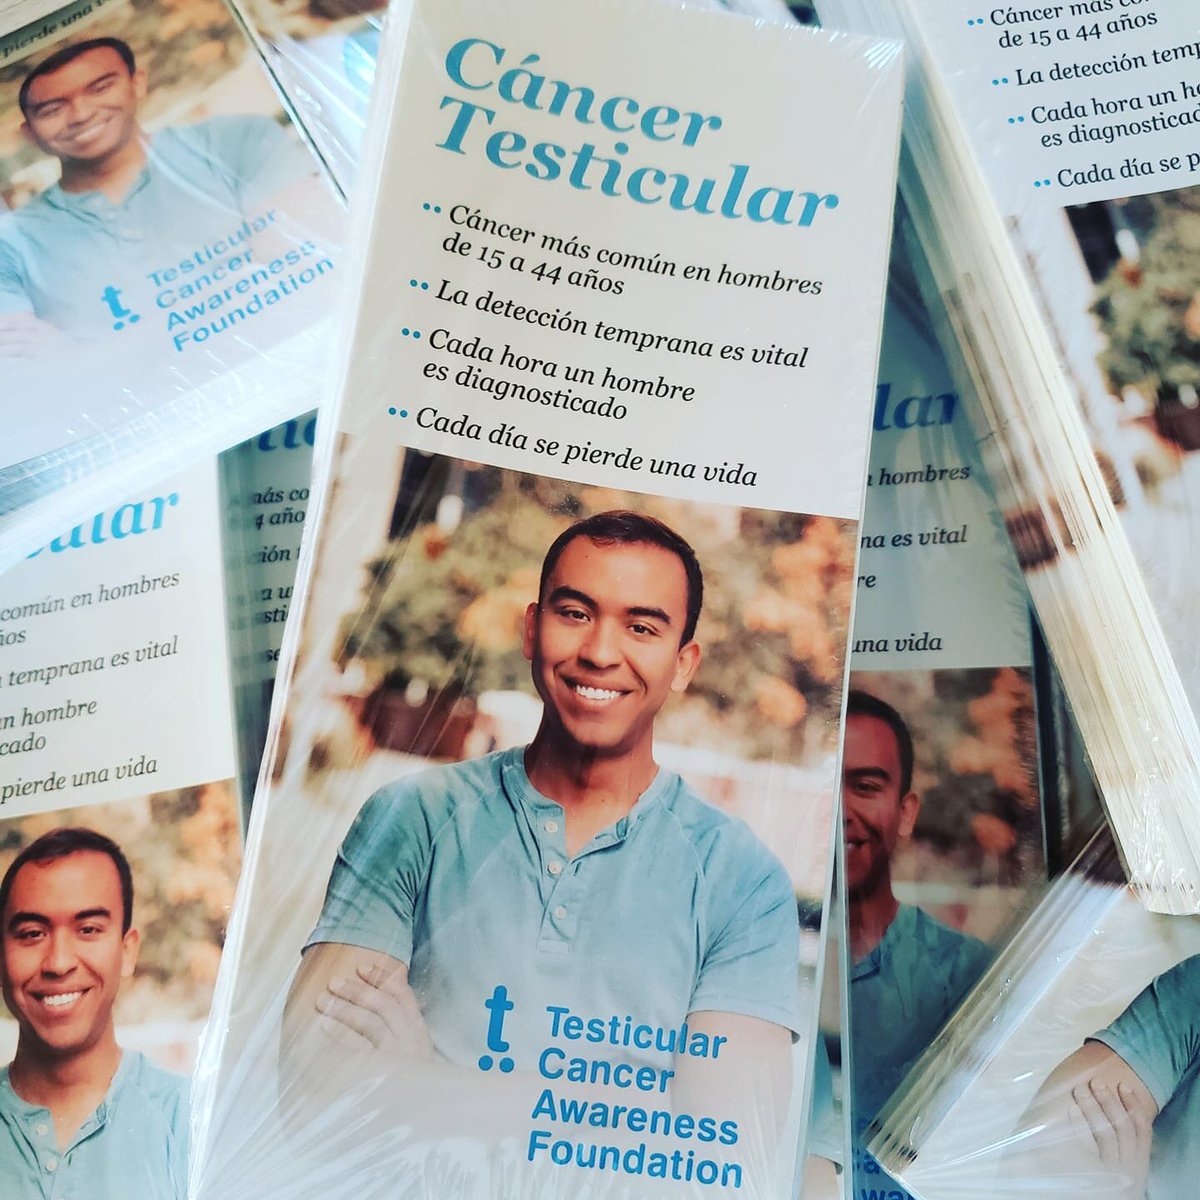 Did you know we have educational materials available in Spanish? These are available in our store at testescancer.org.